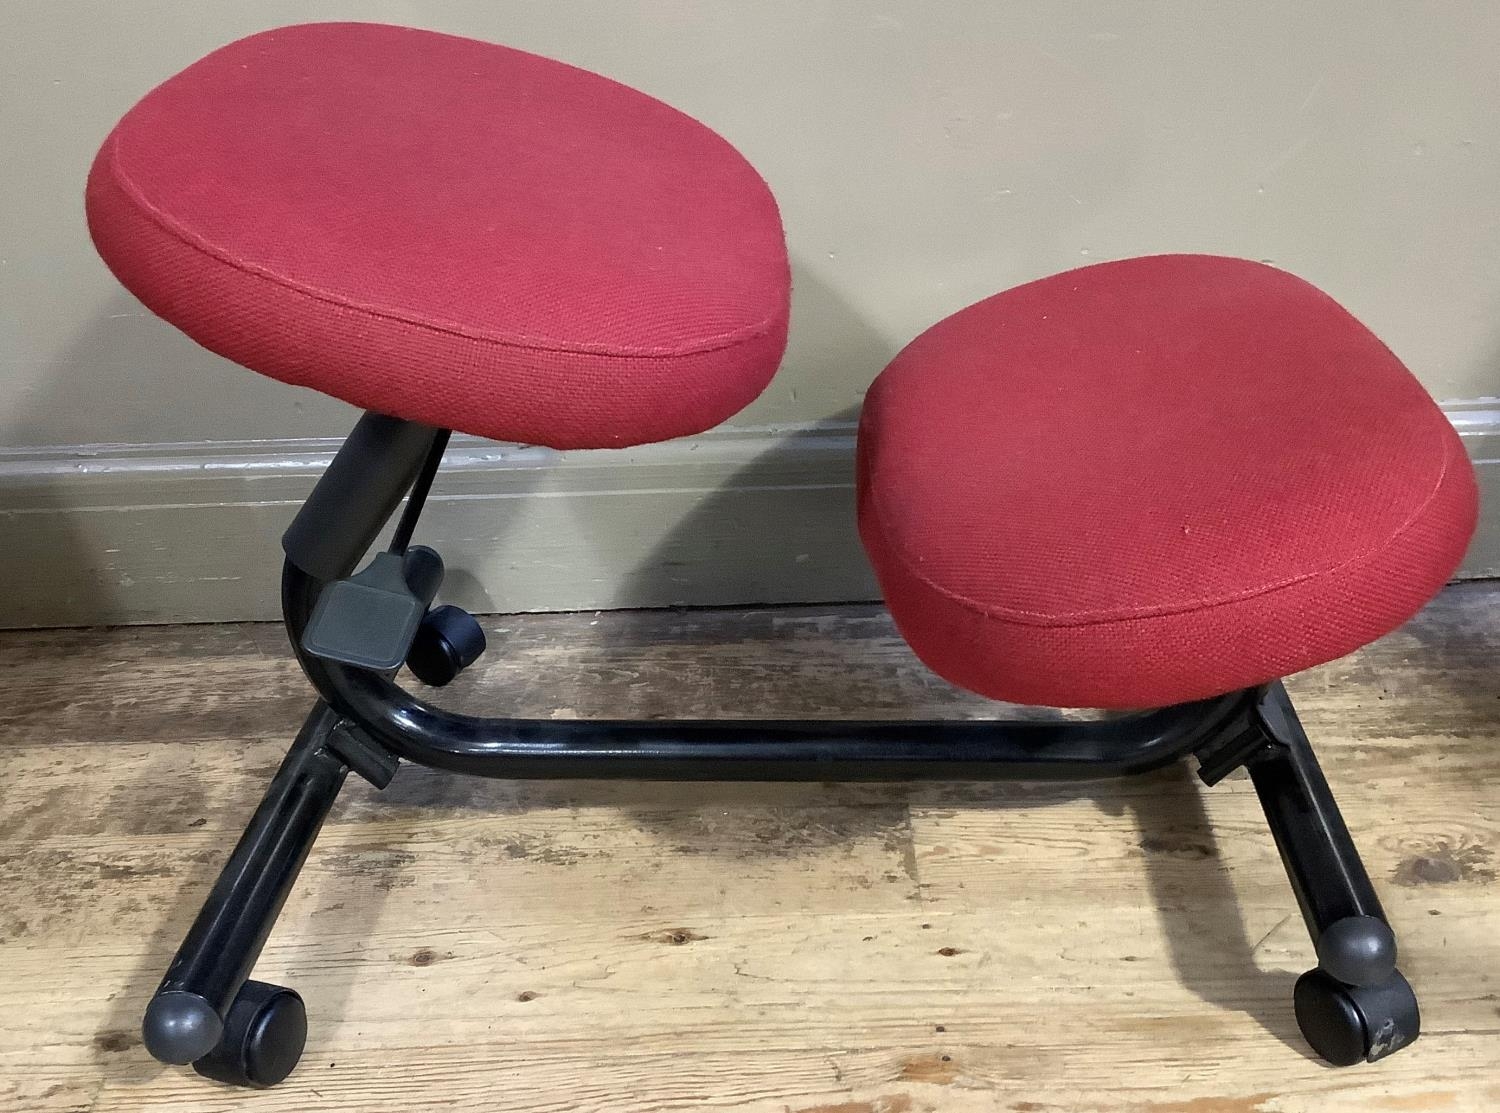 An ergonomic chair with red upholstered seat